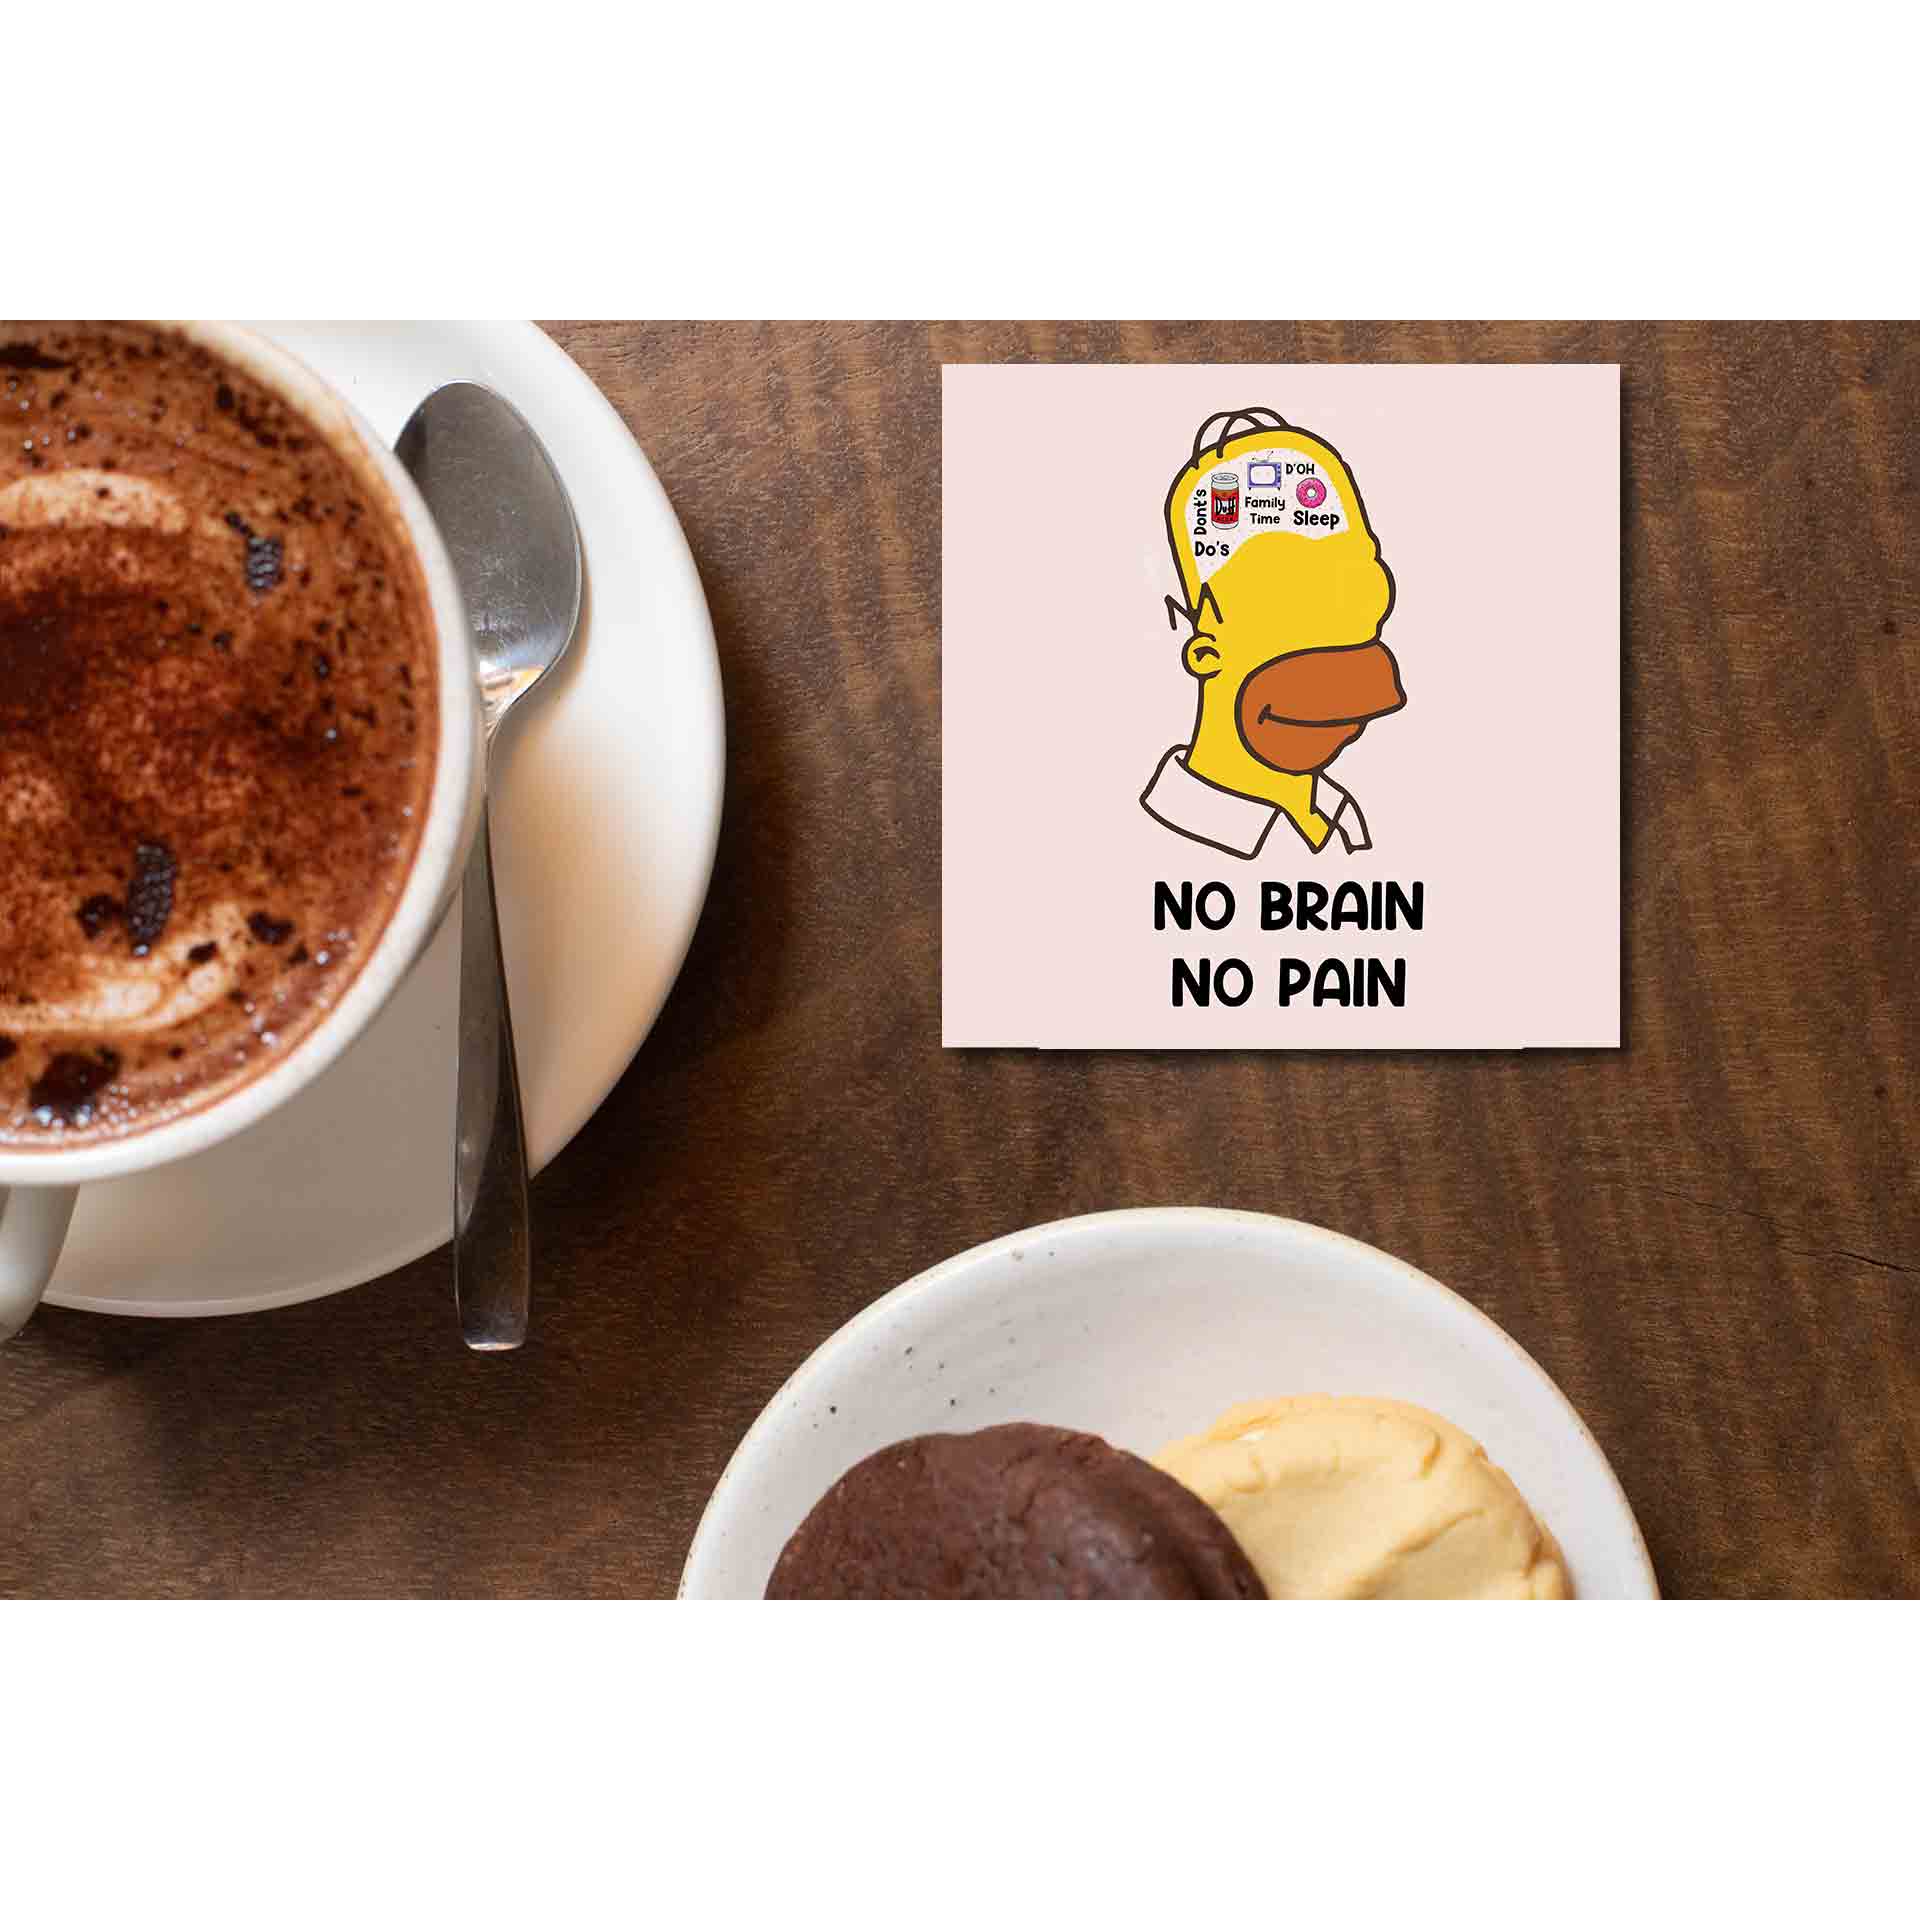 the simpsons no brain no pain coasters wooden table cups indian tv & movies buy online india the banyan tee tbt men women girls boys unisex  - homer simpson